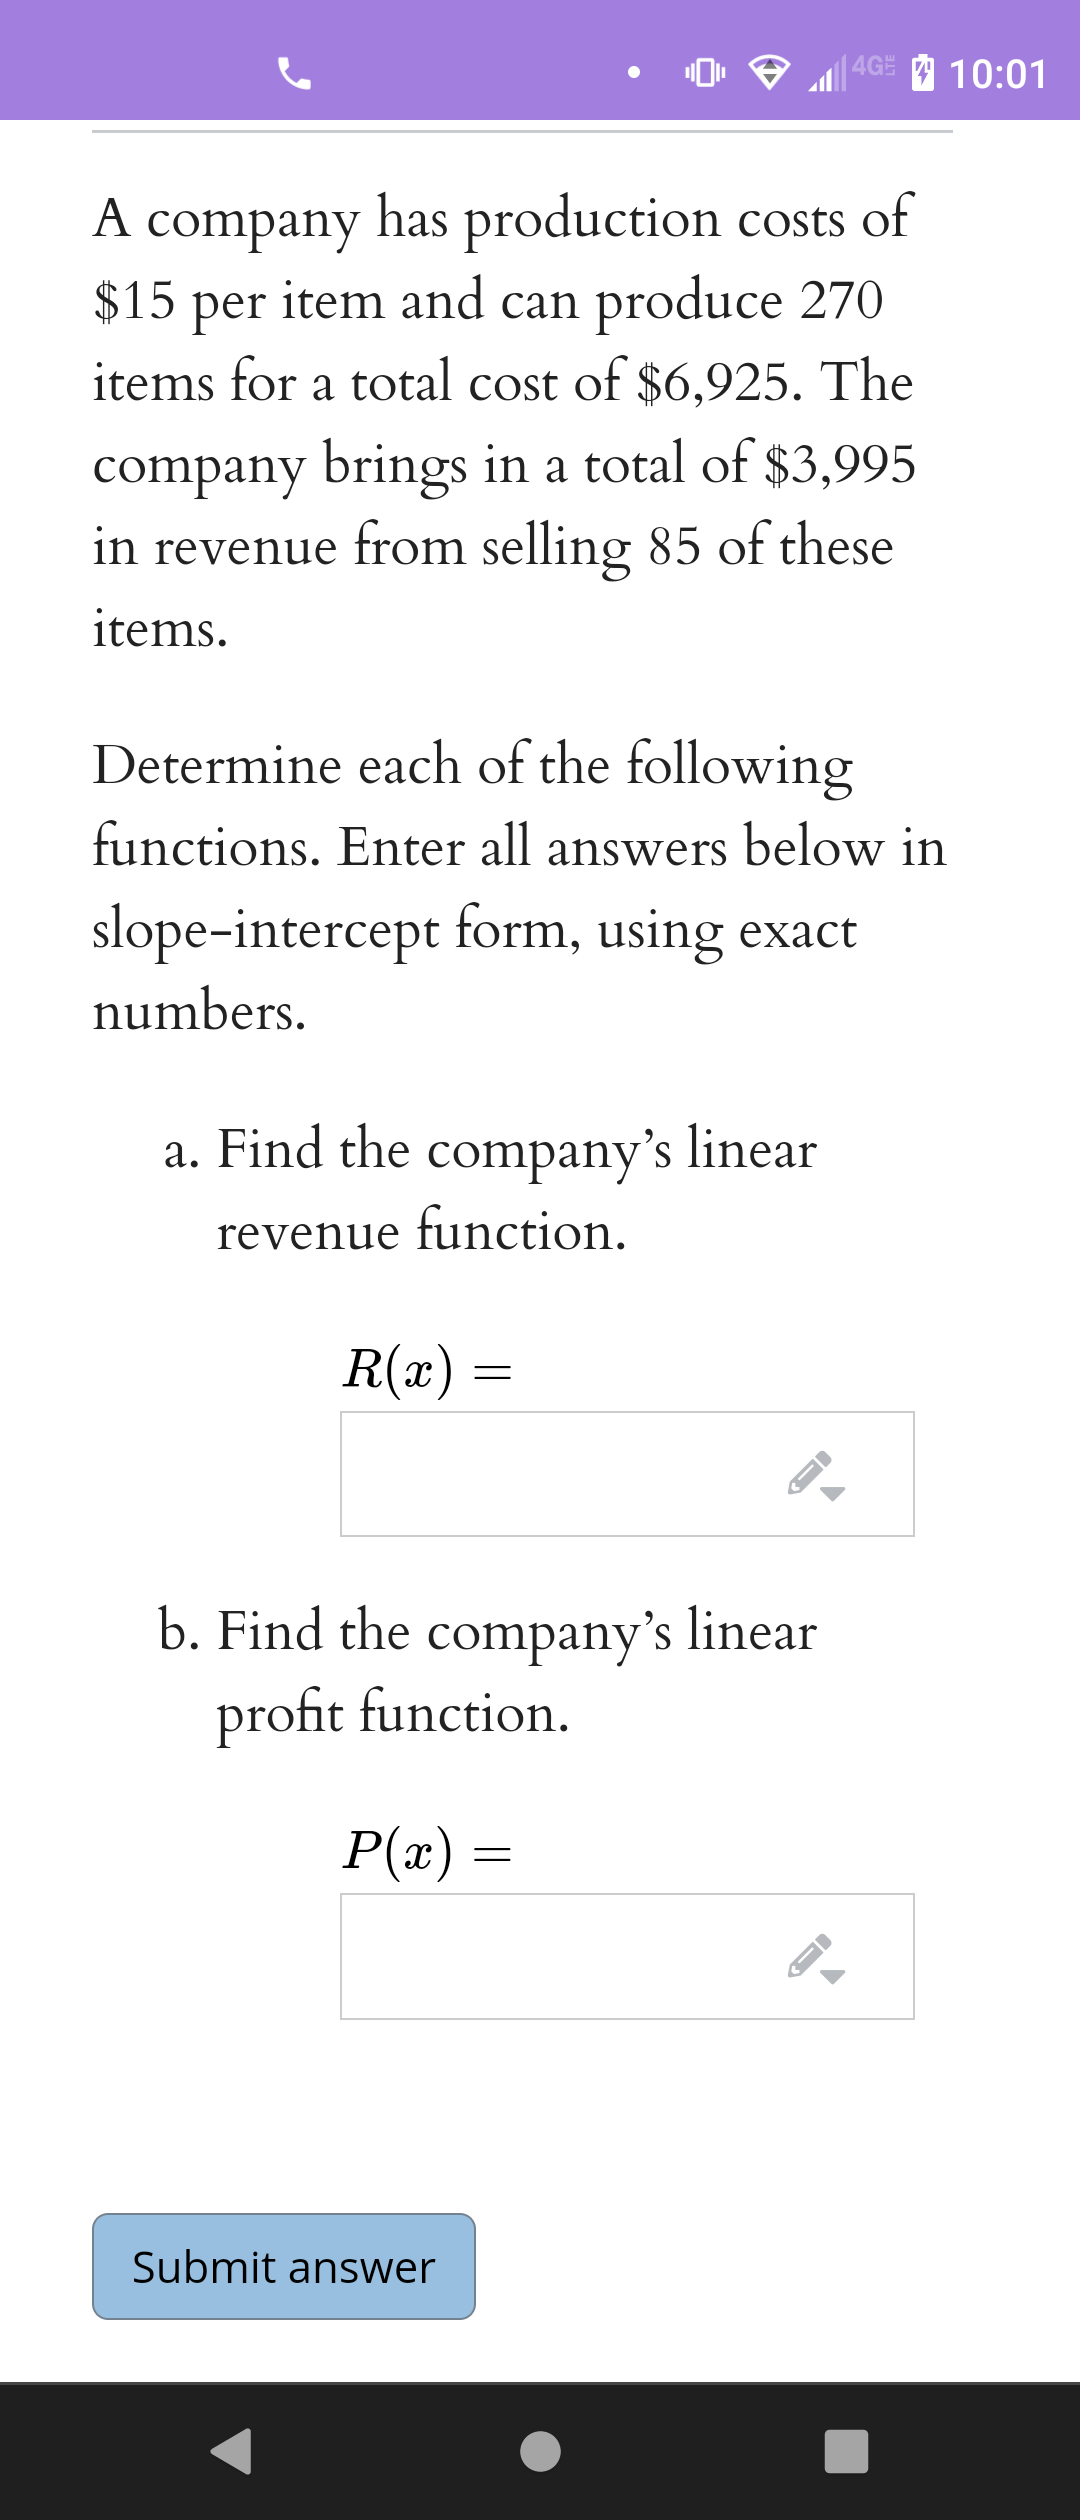 4GE
10:01
A company has production costs of
item and can produce 270
$15
per
items for a total cost of $6,925. The
company brings in a total of $3,995
in revenue from selling 85 of these
items.
Determine each of the following
functions. Enter all answers below in
slope-intercept form, using exact
numbers.
a. Find the company's linear
revenue function.
R(x)
b. Find the company's linear
profit function.
P(x)
Submit answer
